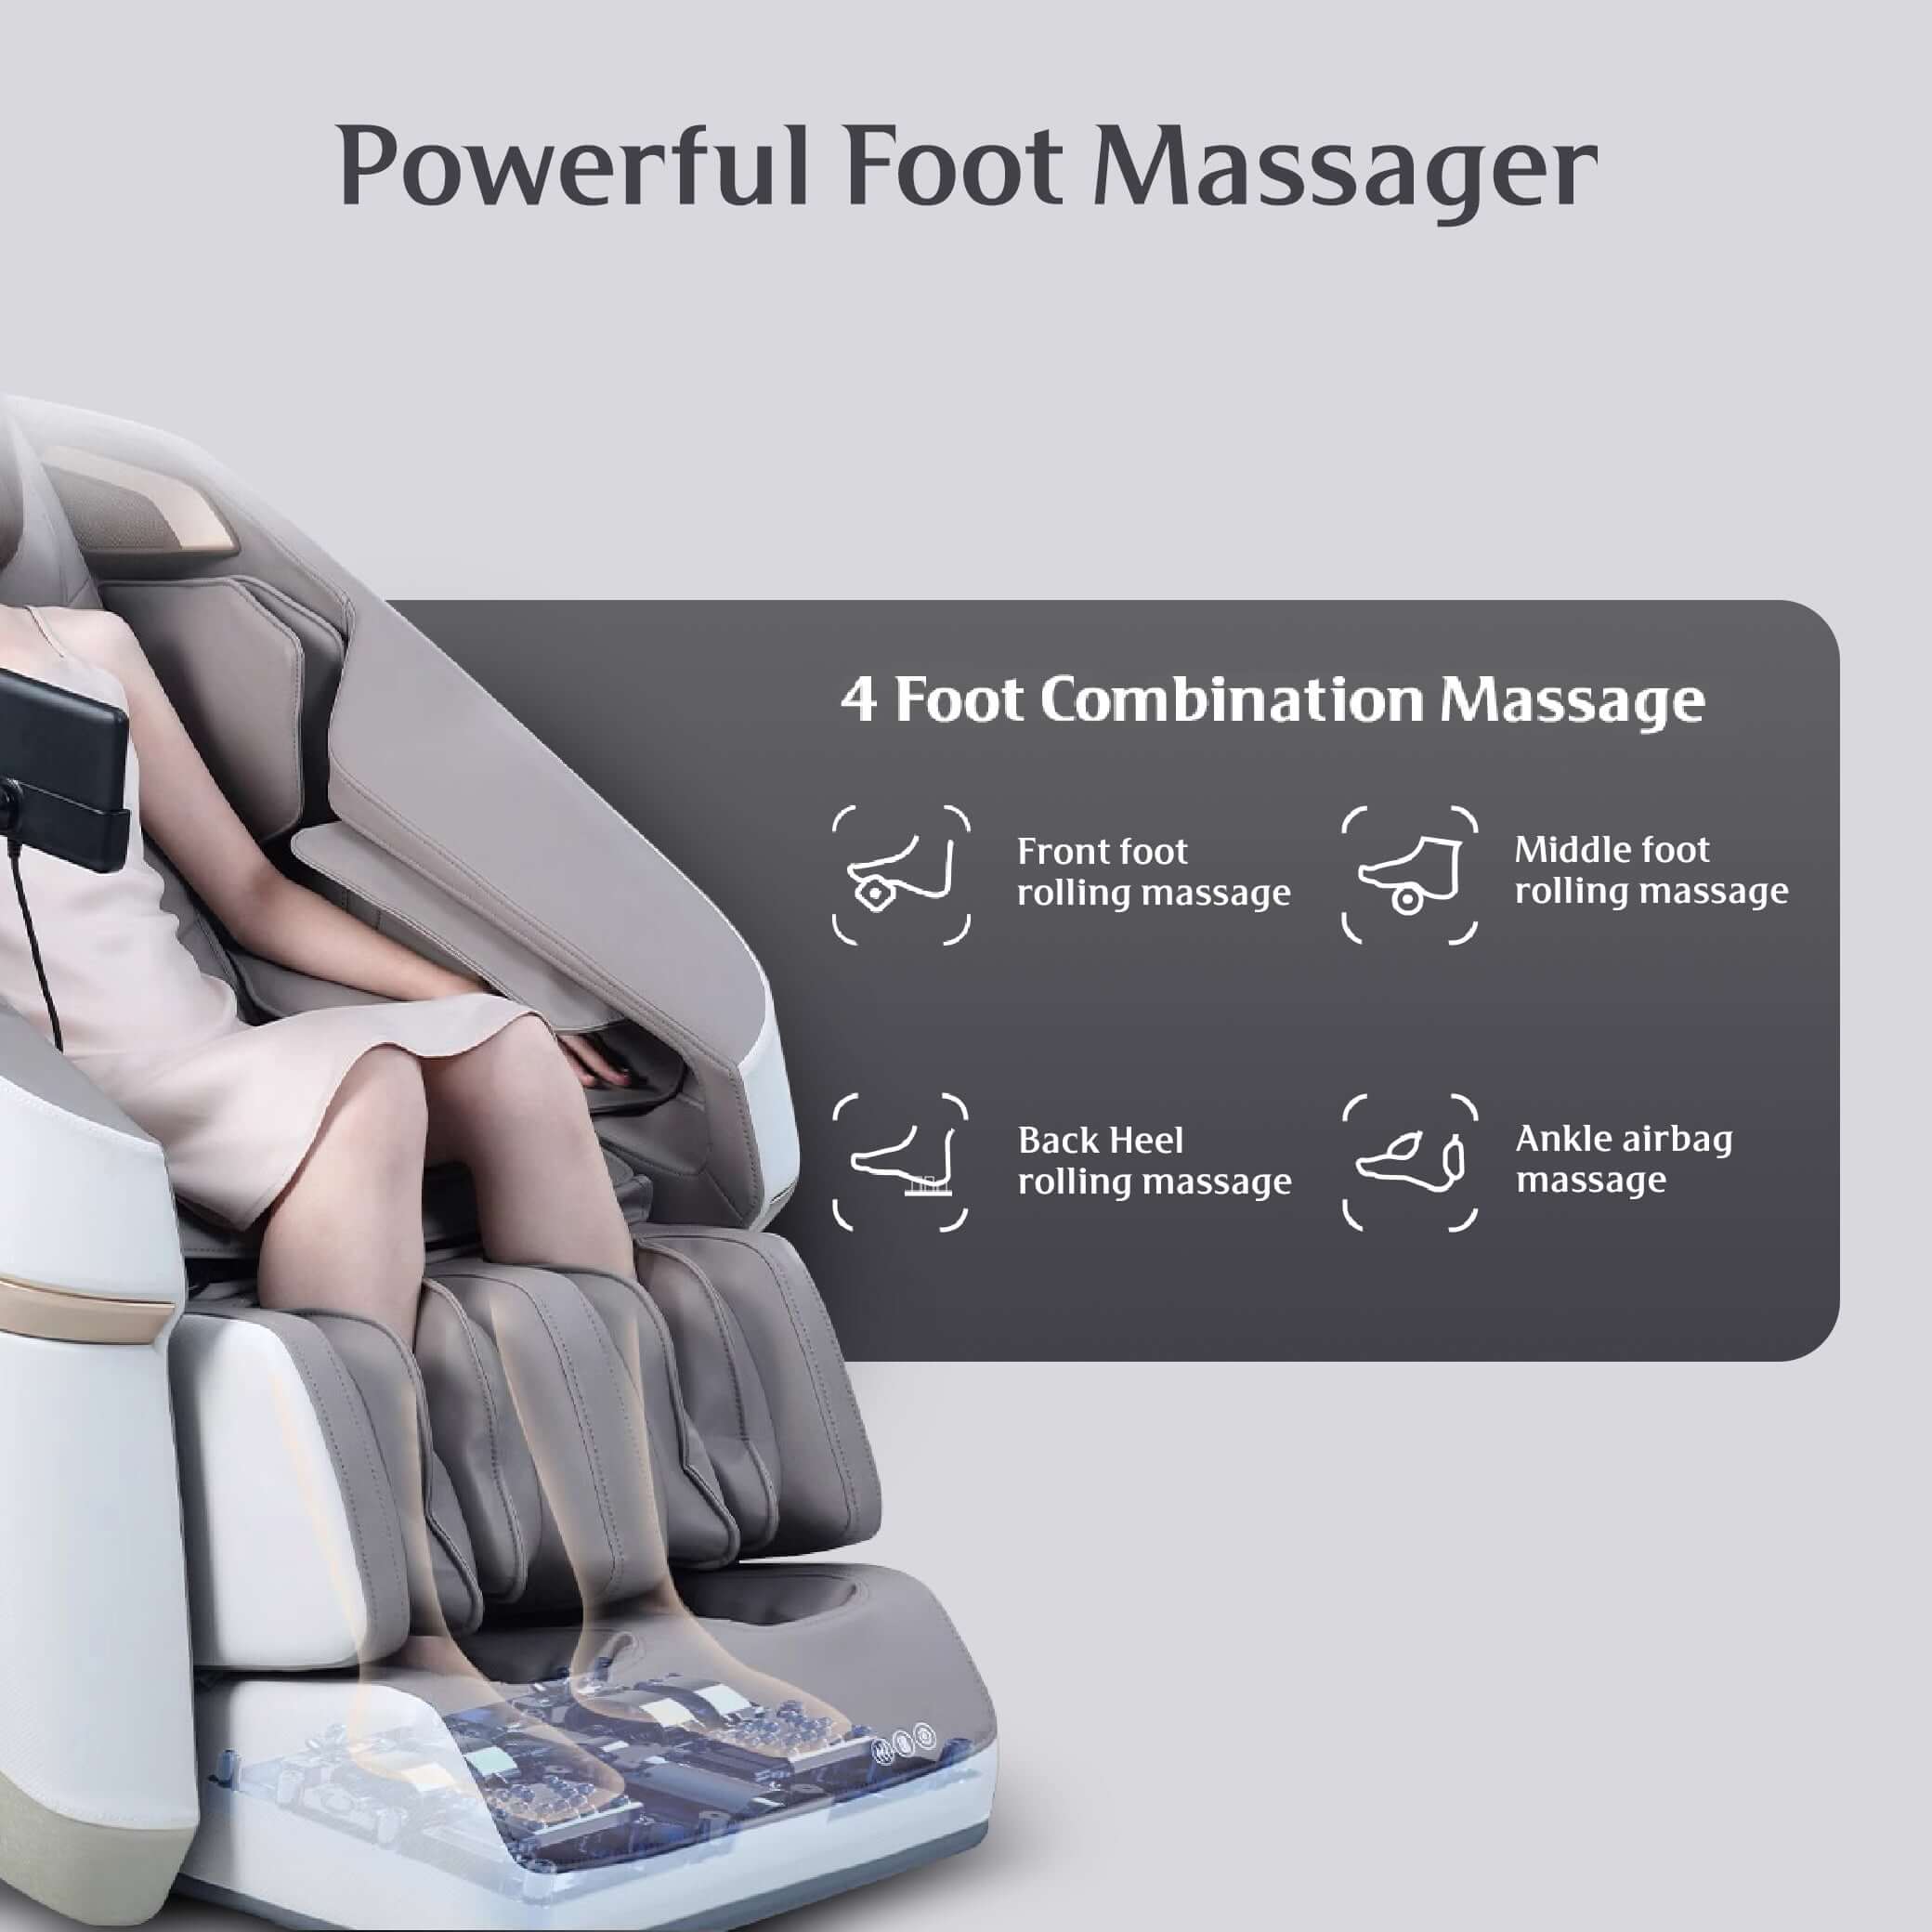 Grey Jimny Massage Chair with powerful foot massager featuring 4 combination modes for ultimate relaxation and comfort. , best massage chair uae, massage chair Dubai, massage chair uae, massage chair Saudi Arabia, كرسي التدليك, Best massage chair in Dubai